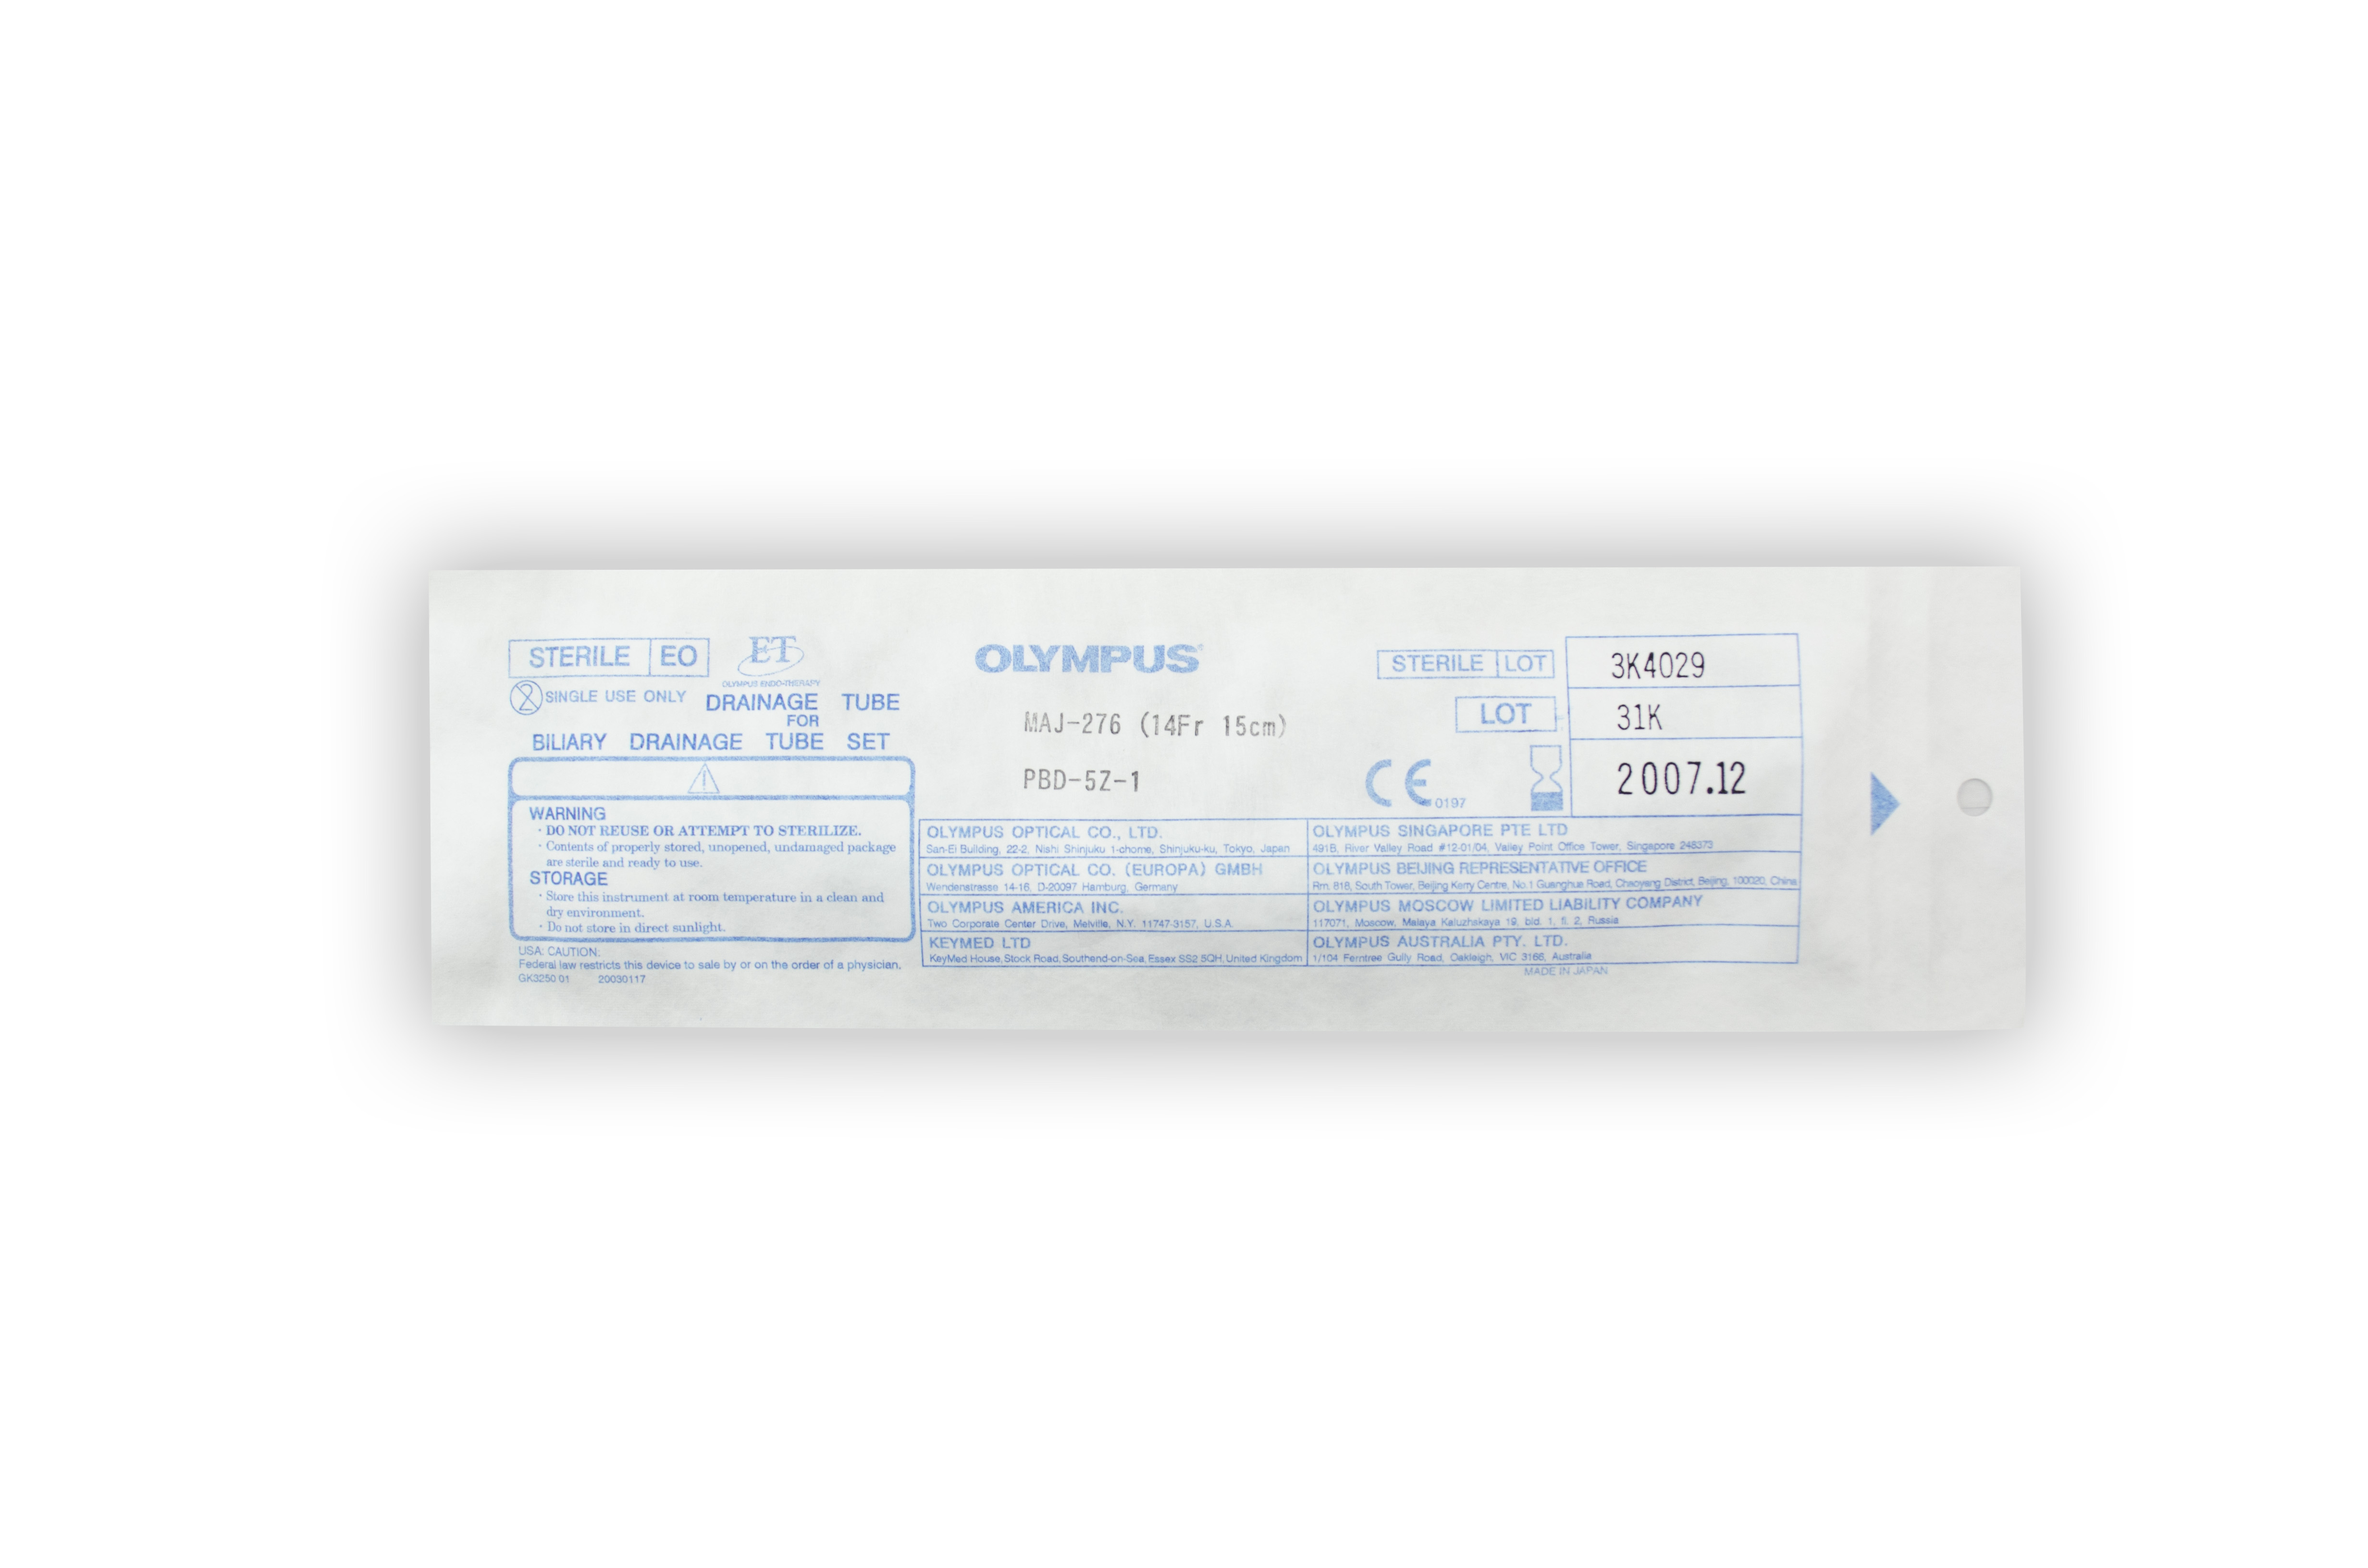 [Out-of-Date] Olympus Disposable Accessory - MAJ-276